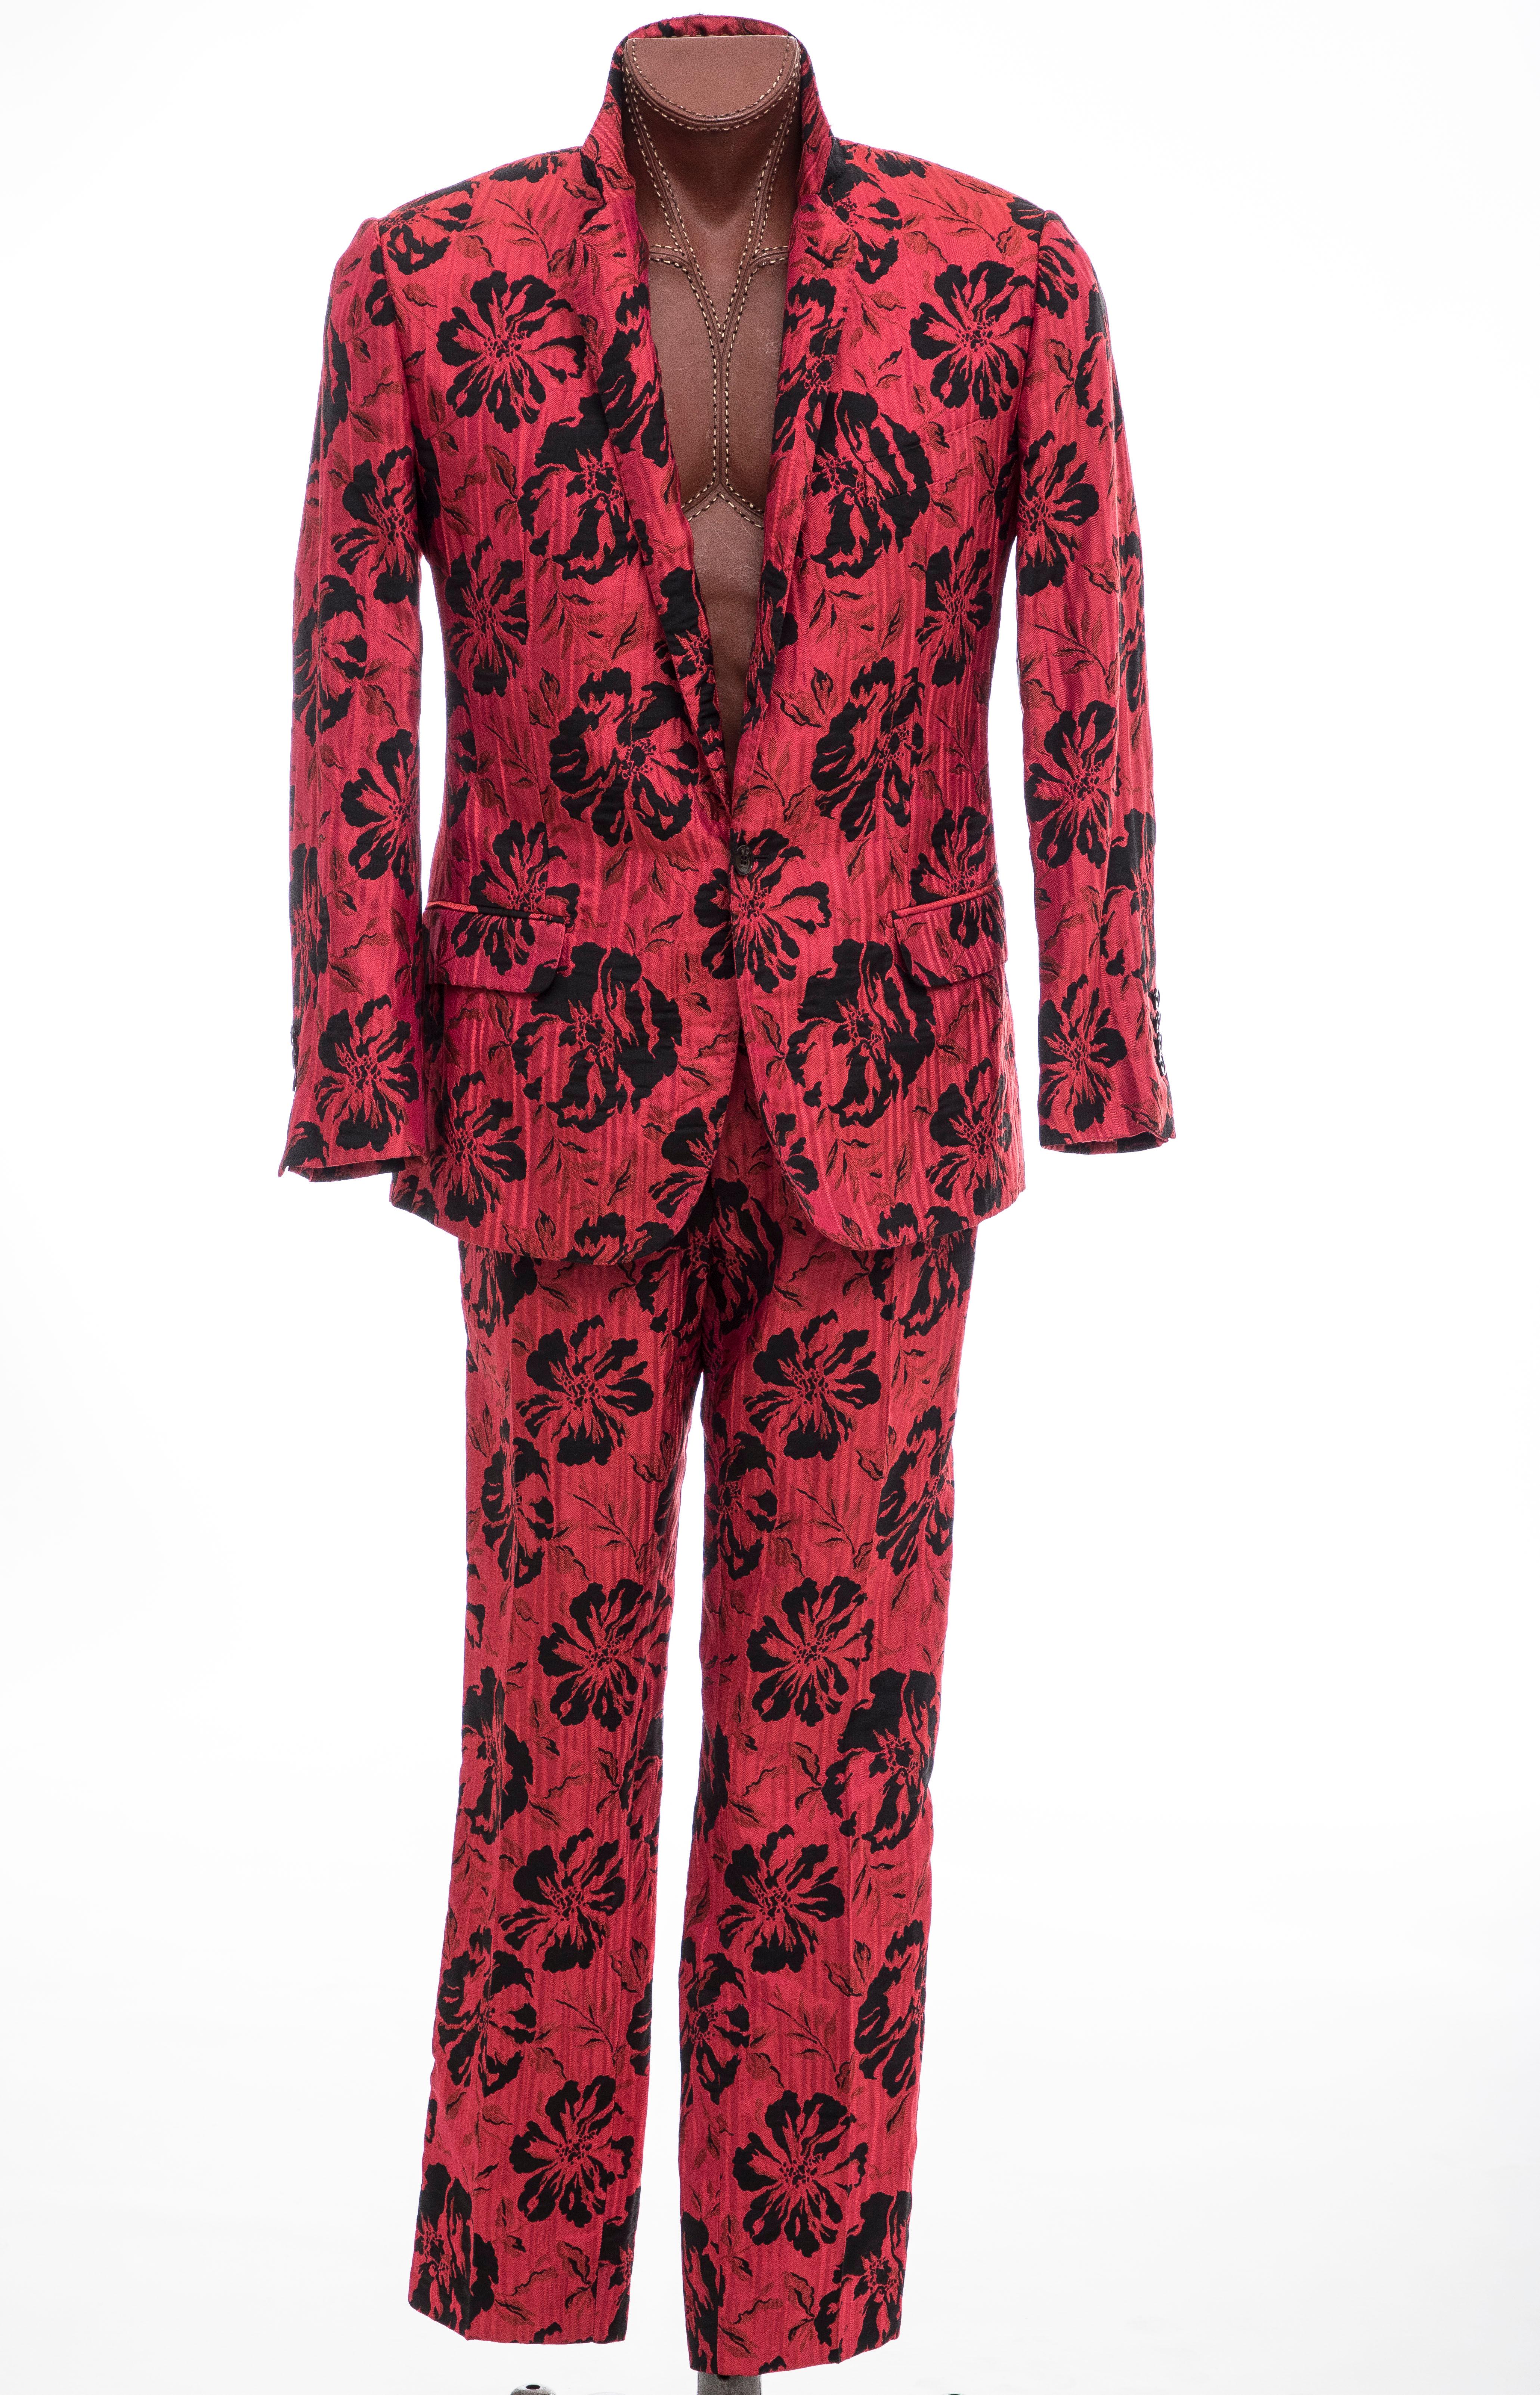 Dolce & Gabbana Men's Runway Red Floral Jacquard Suit, Fall 2011 5